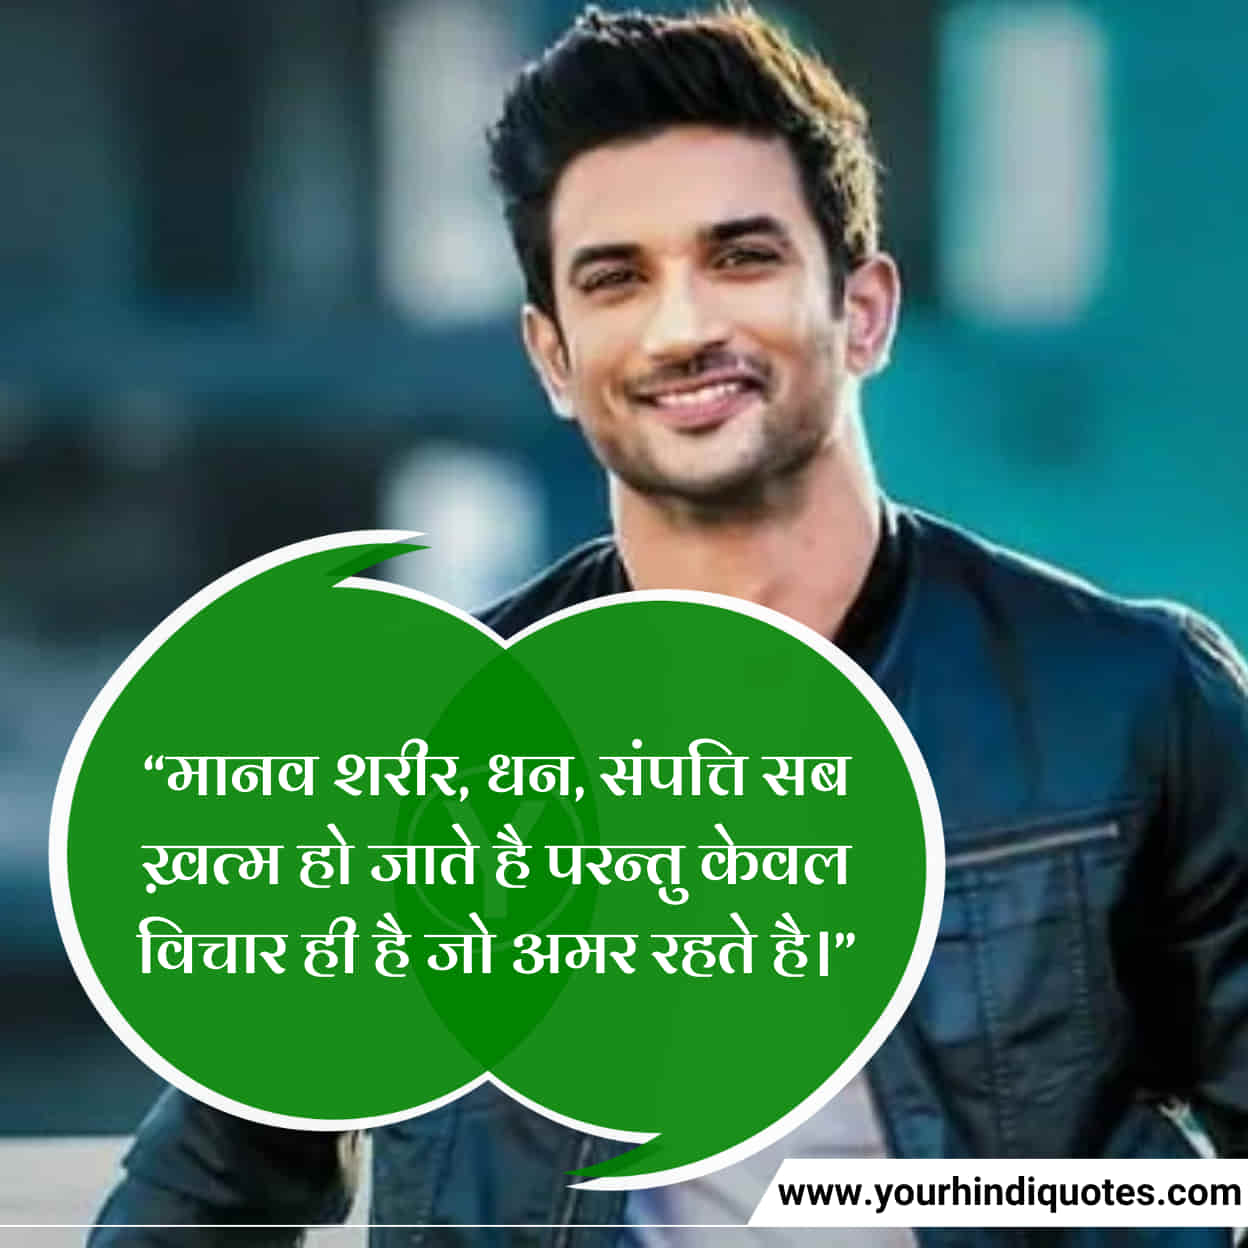 Best Hindi Death Quotes